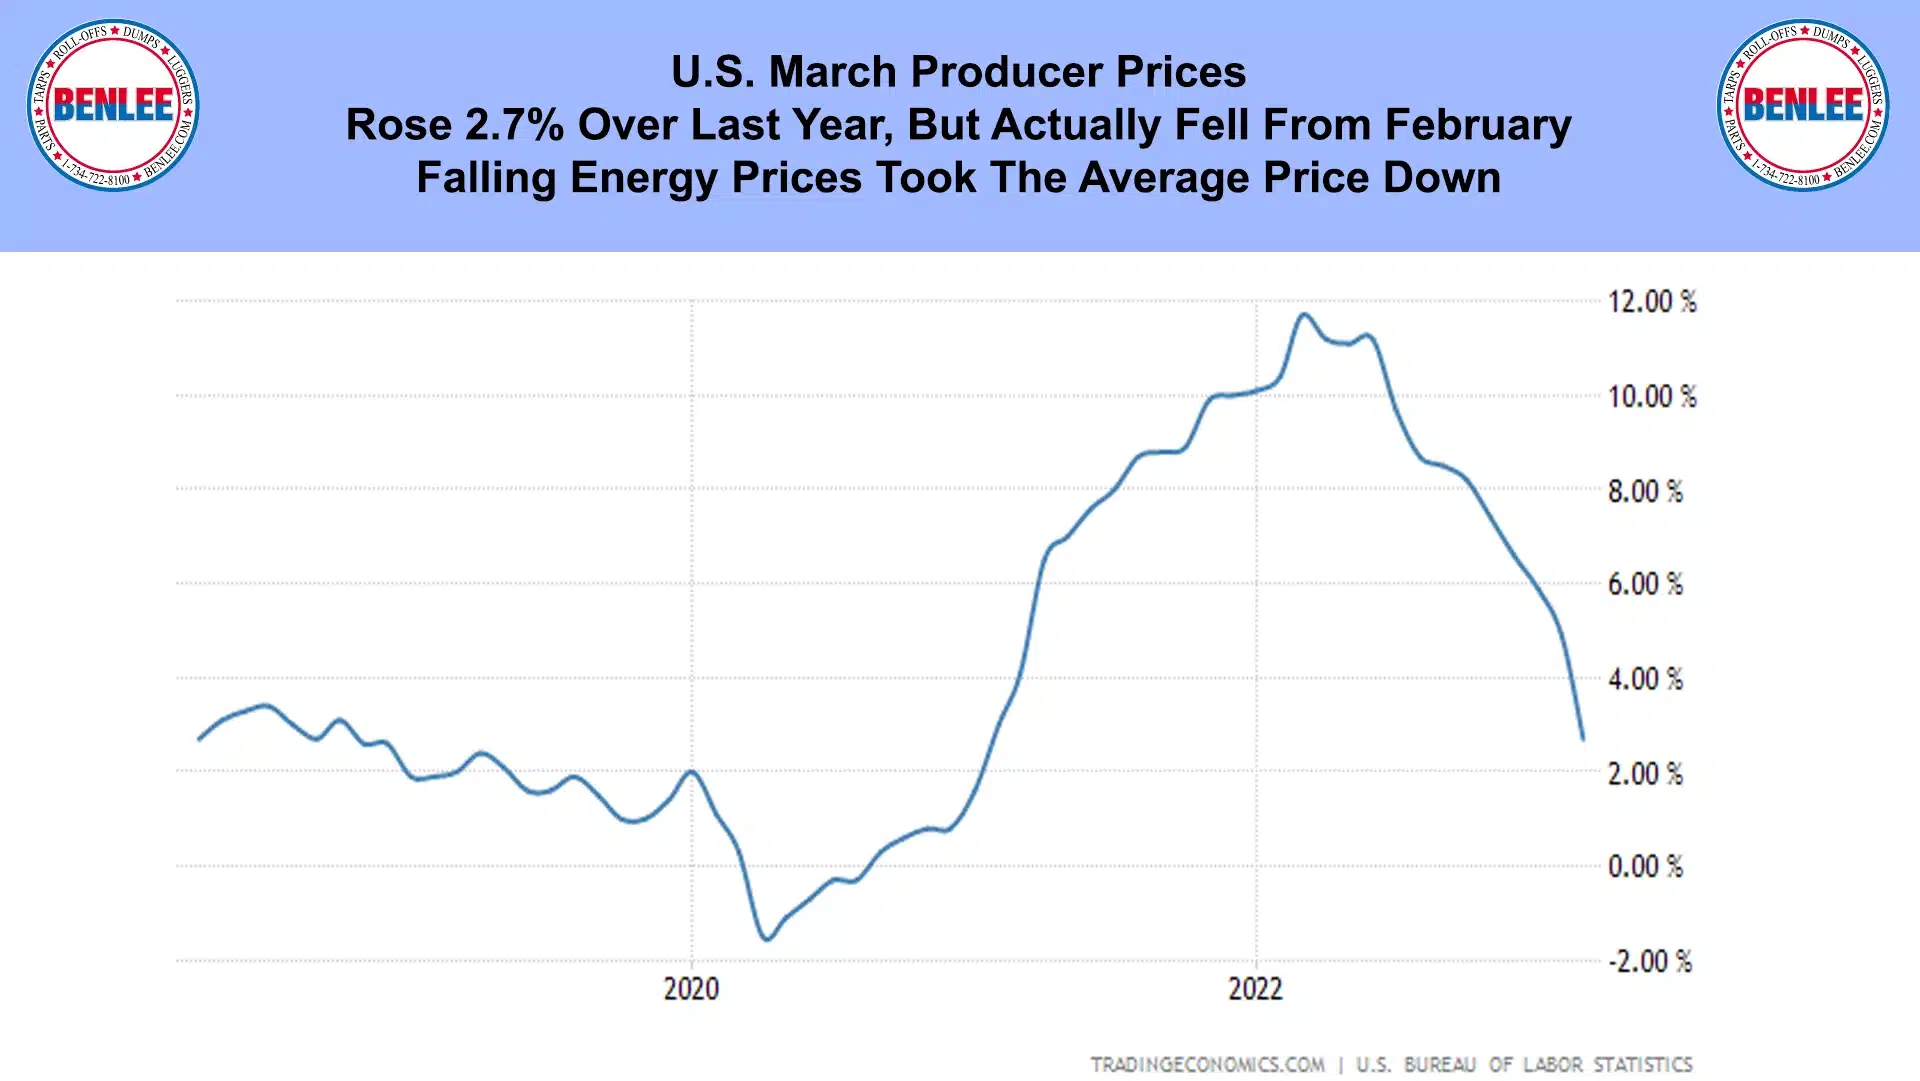 U.S. March Producer Prices